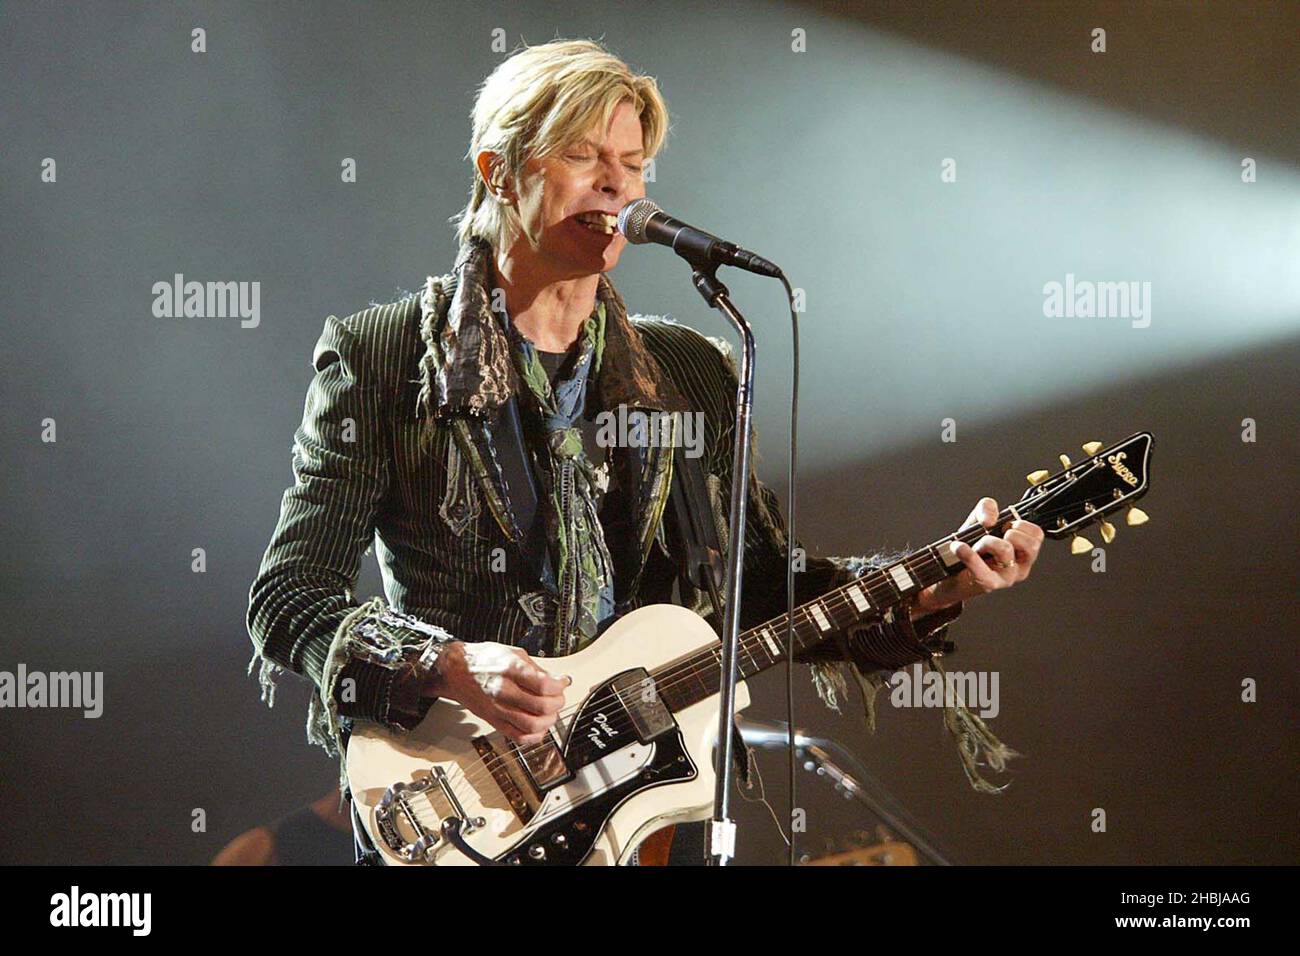 David Bowie performs and headlines live on stage at the Isle of Wight Festival in Newport, Isle of Wight on Sunday. Stock Photo